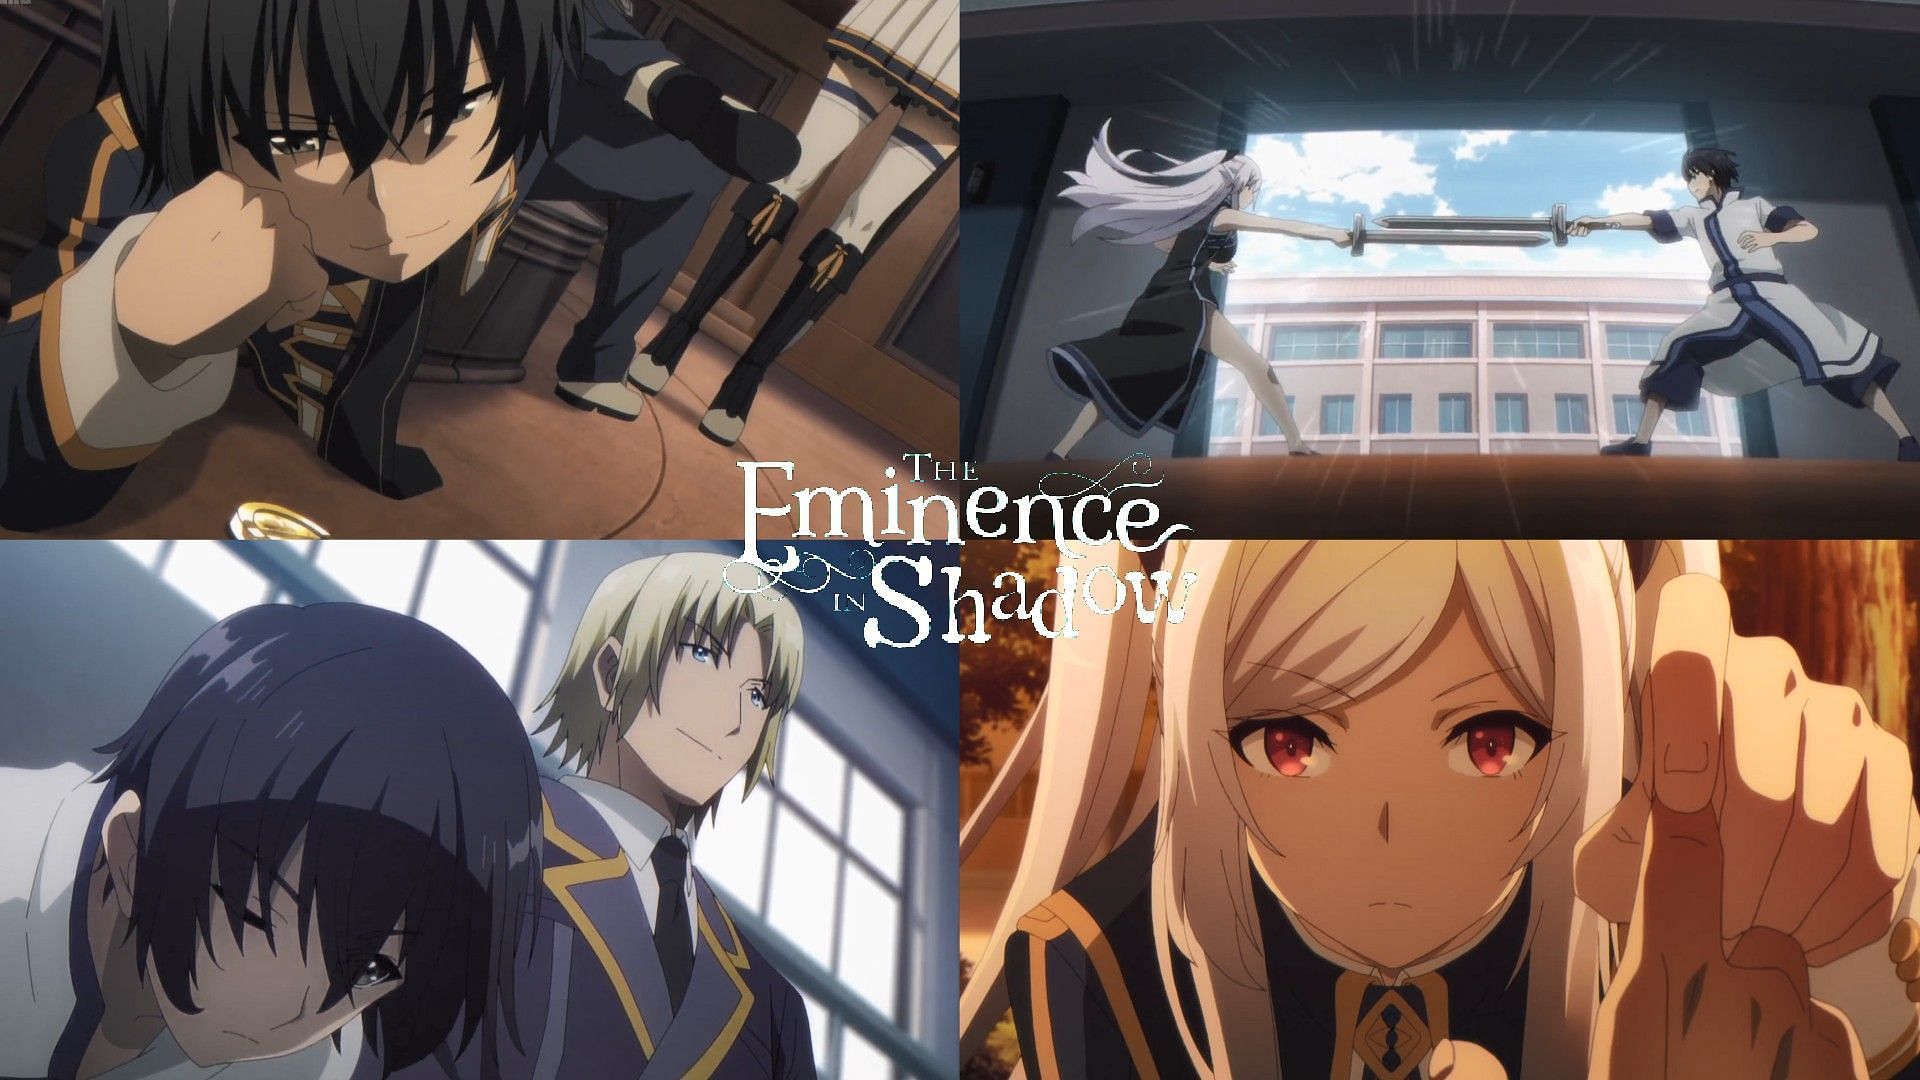 The Eminence in Shadow episode 3 review - Cid in a relationship with the  most popular girl of Midgar Academy